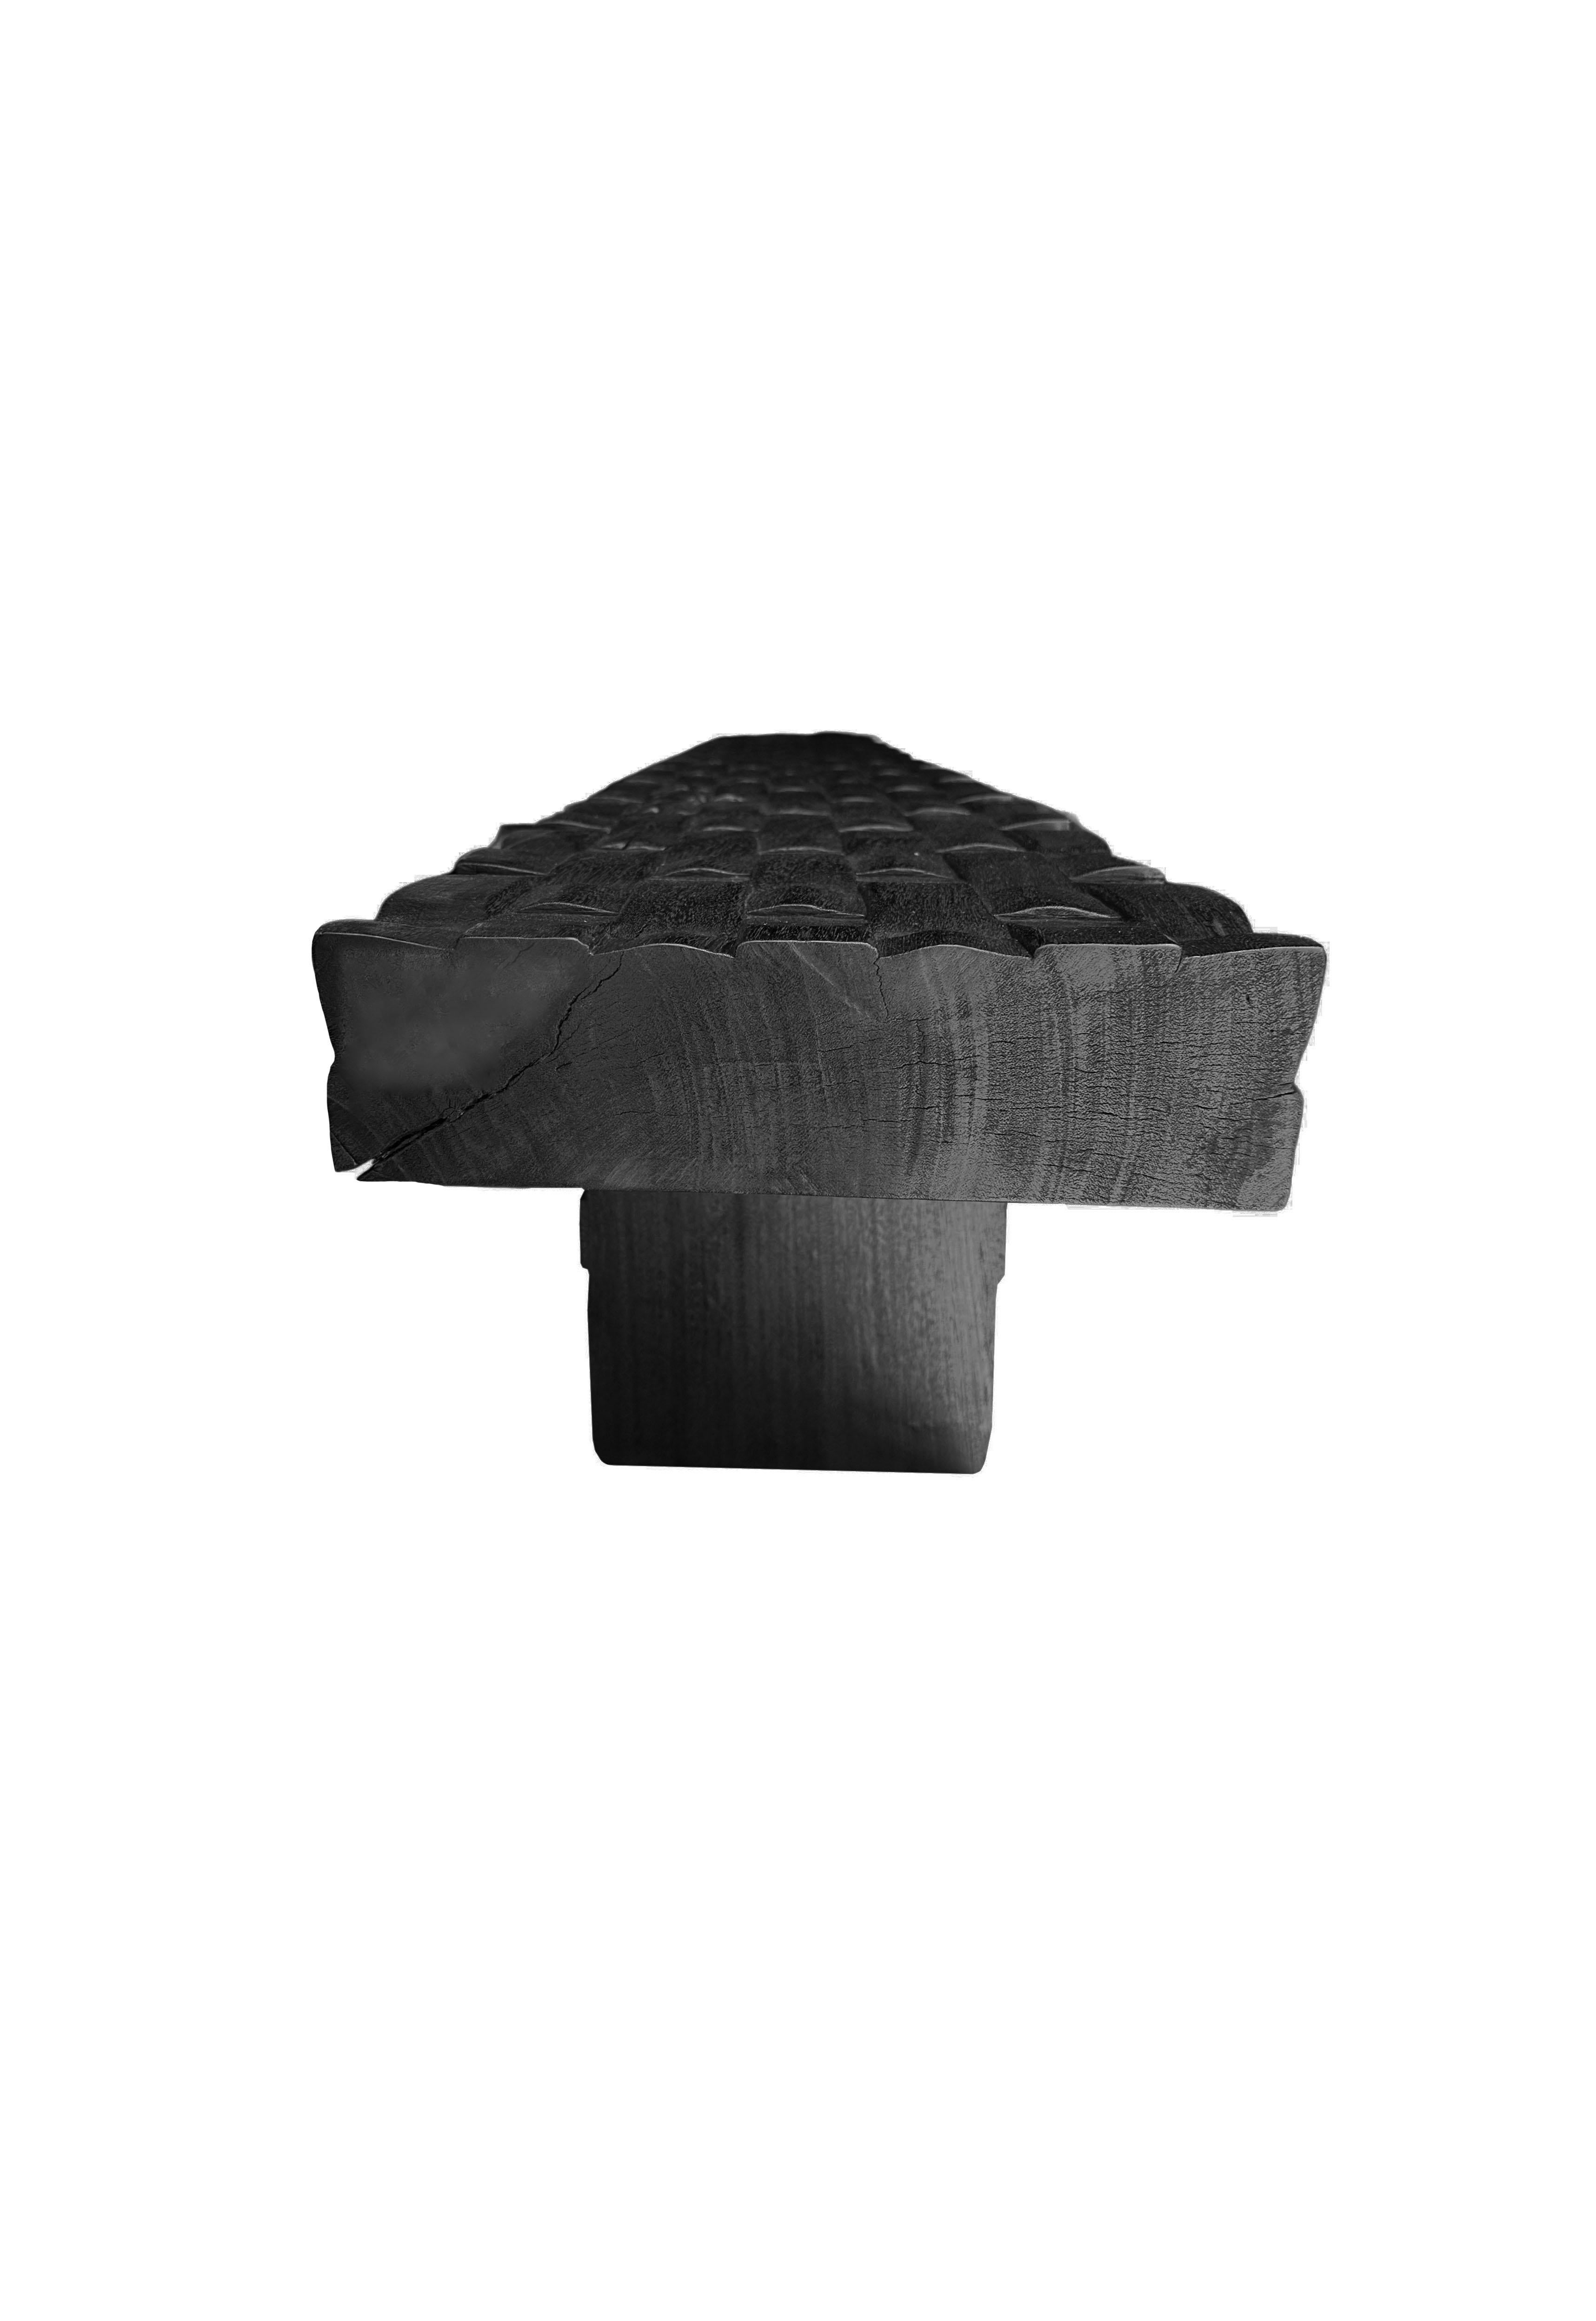 Contemporary Sculptural Mango Wood Bench, Carved Detailing, Burnt Finish Modern Organic For Sale